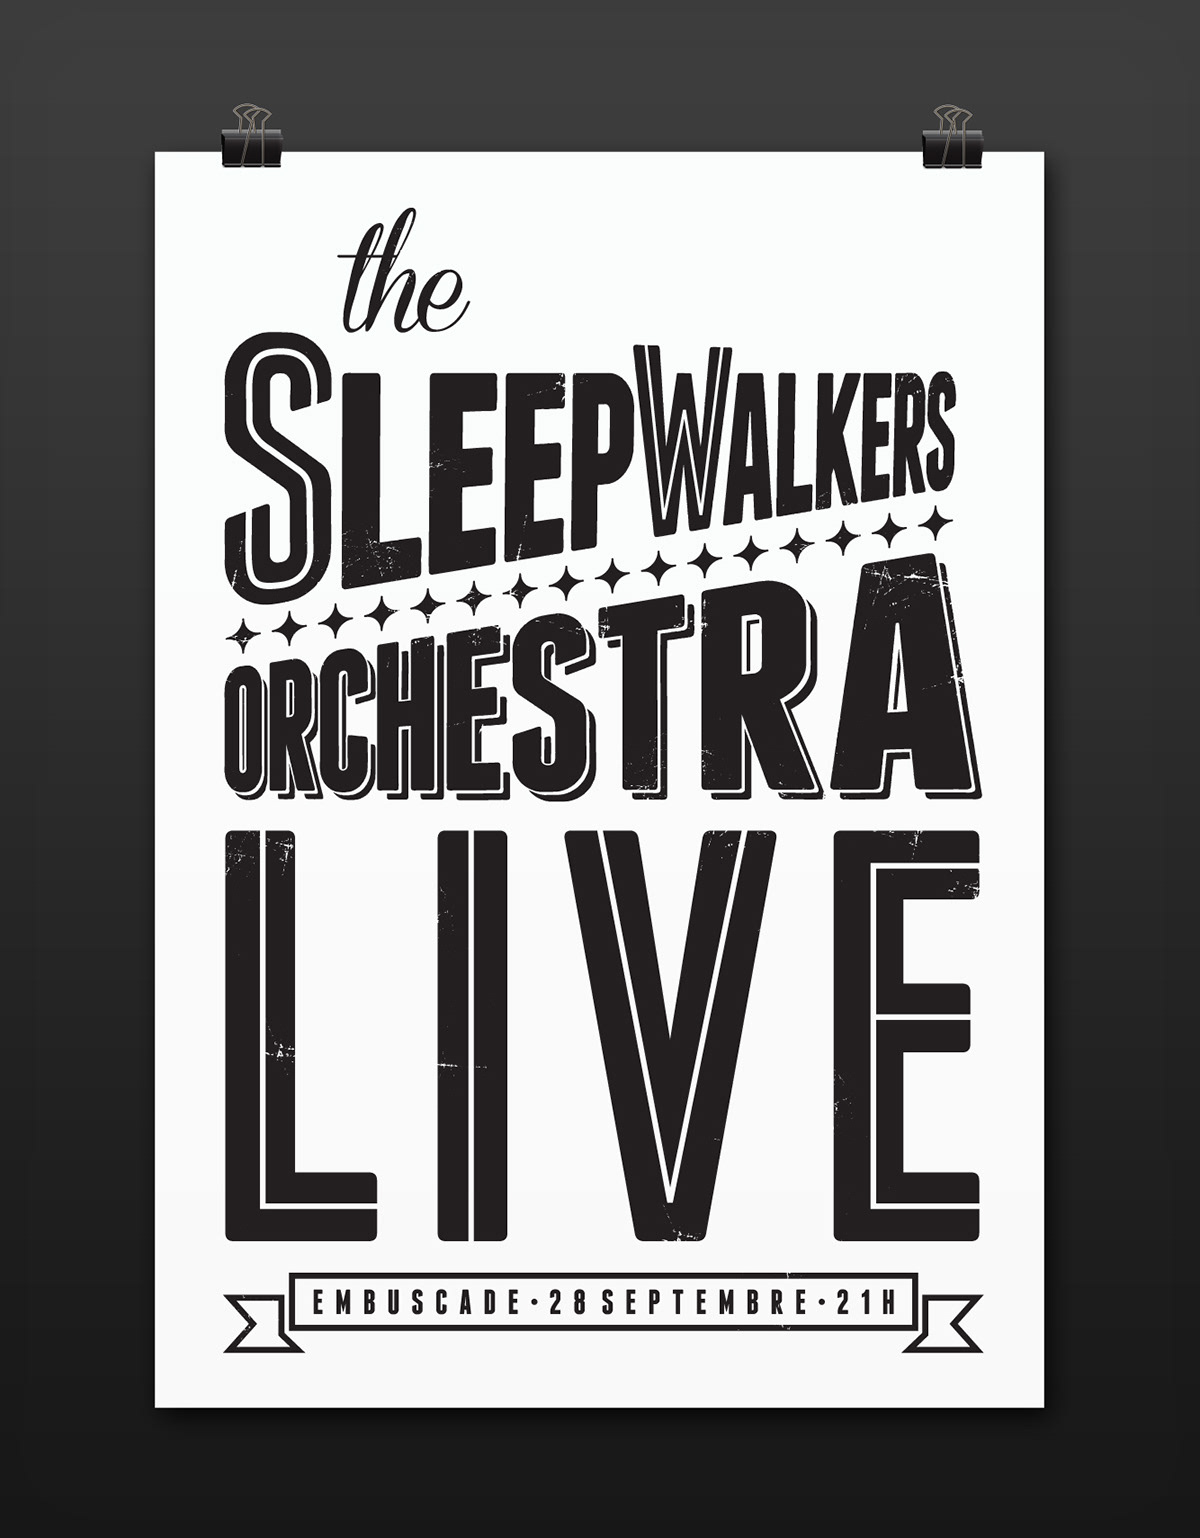 swing blues sleep Walkers orchestra band Retro vintage logo Rock And Roll rock